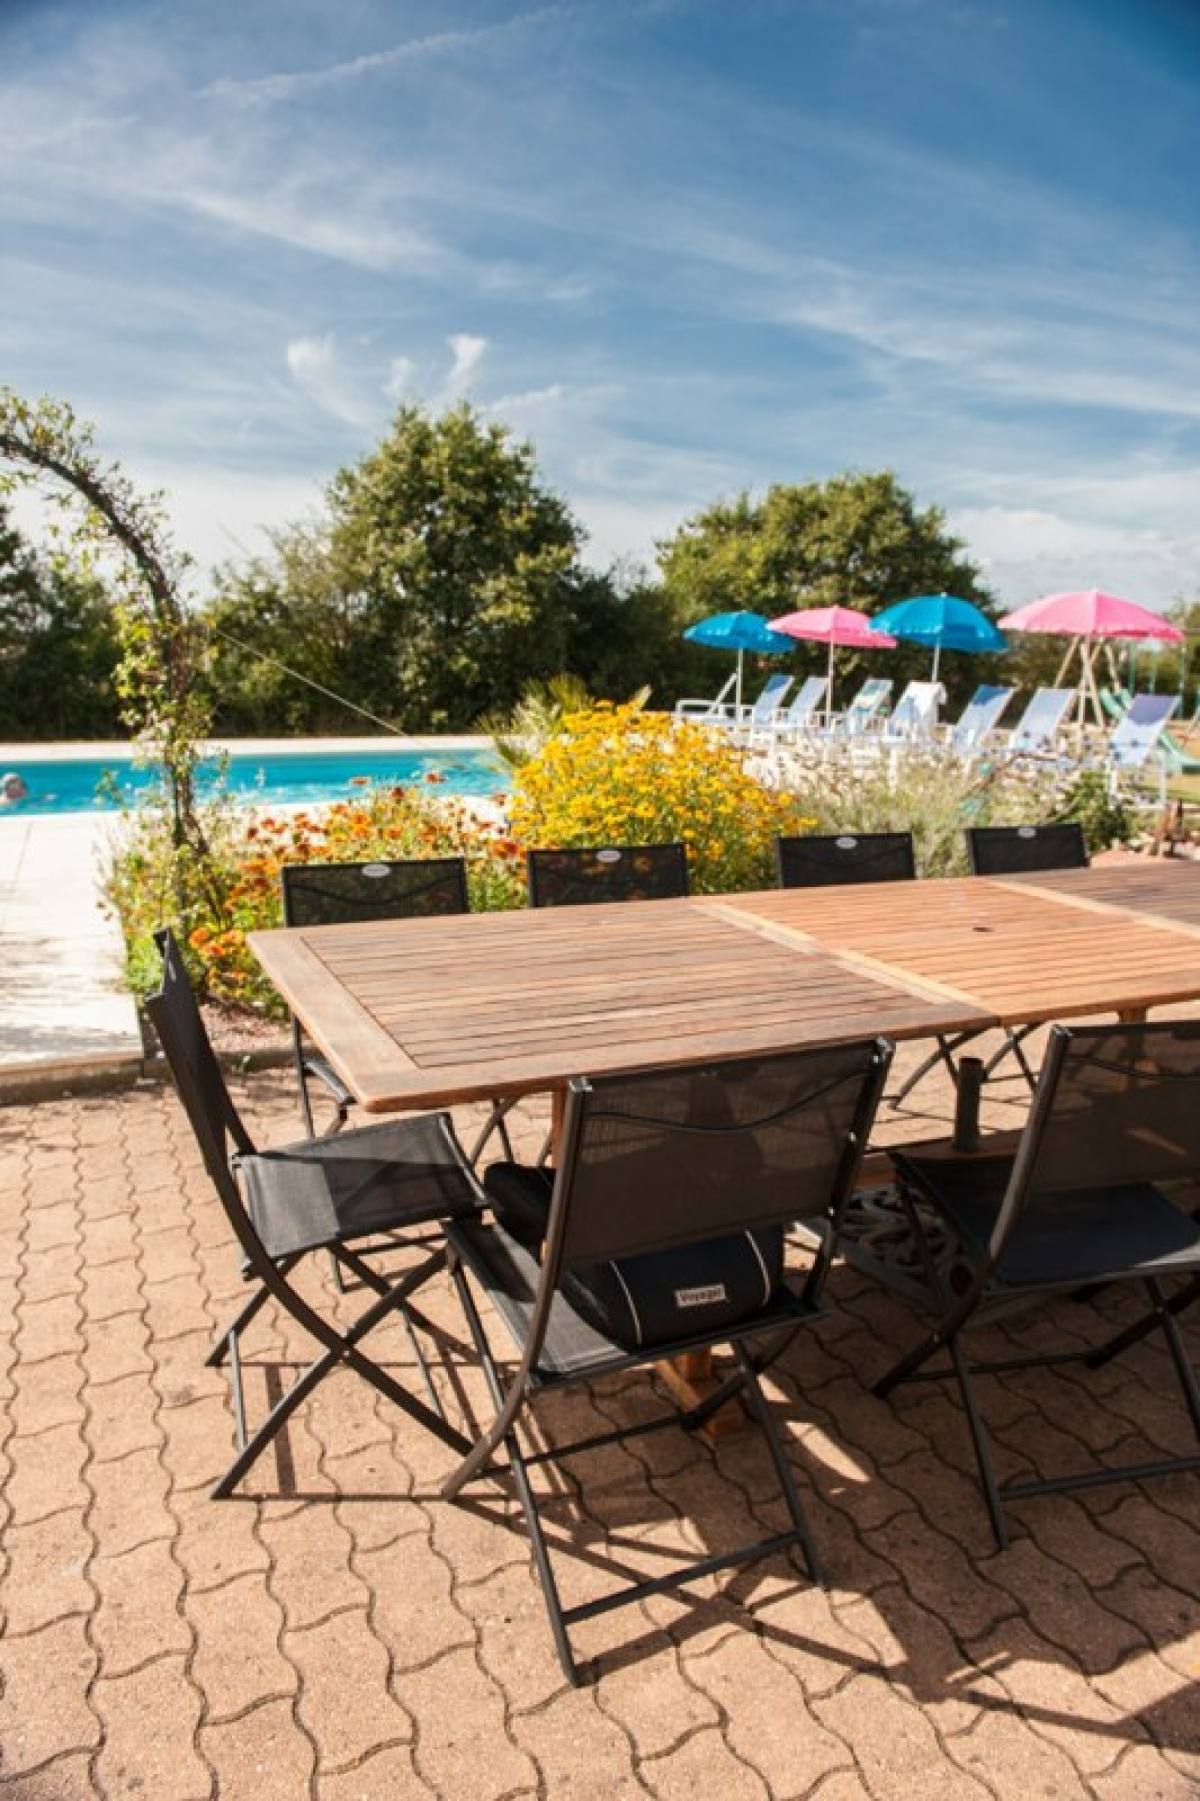 5 Bedroom Private house in Poitou-Charentes, France